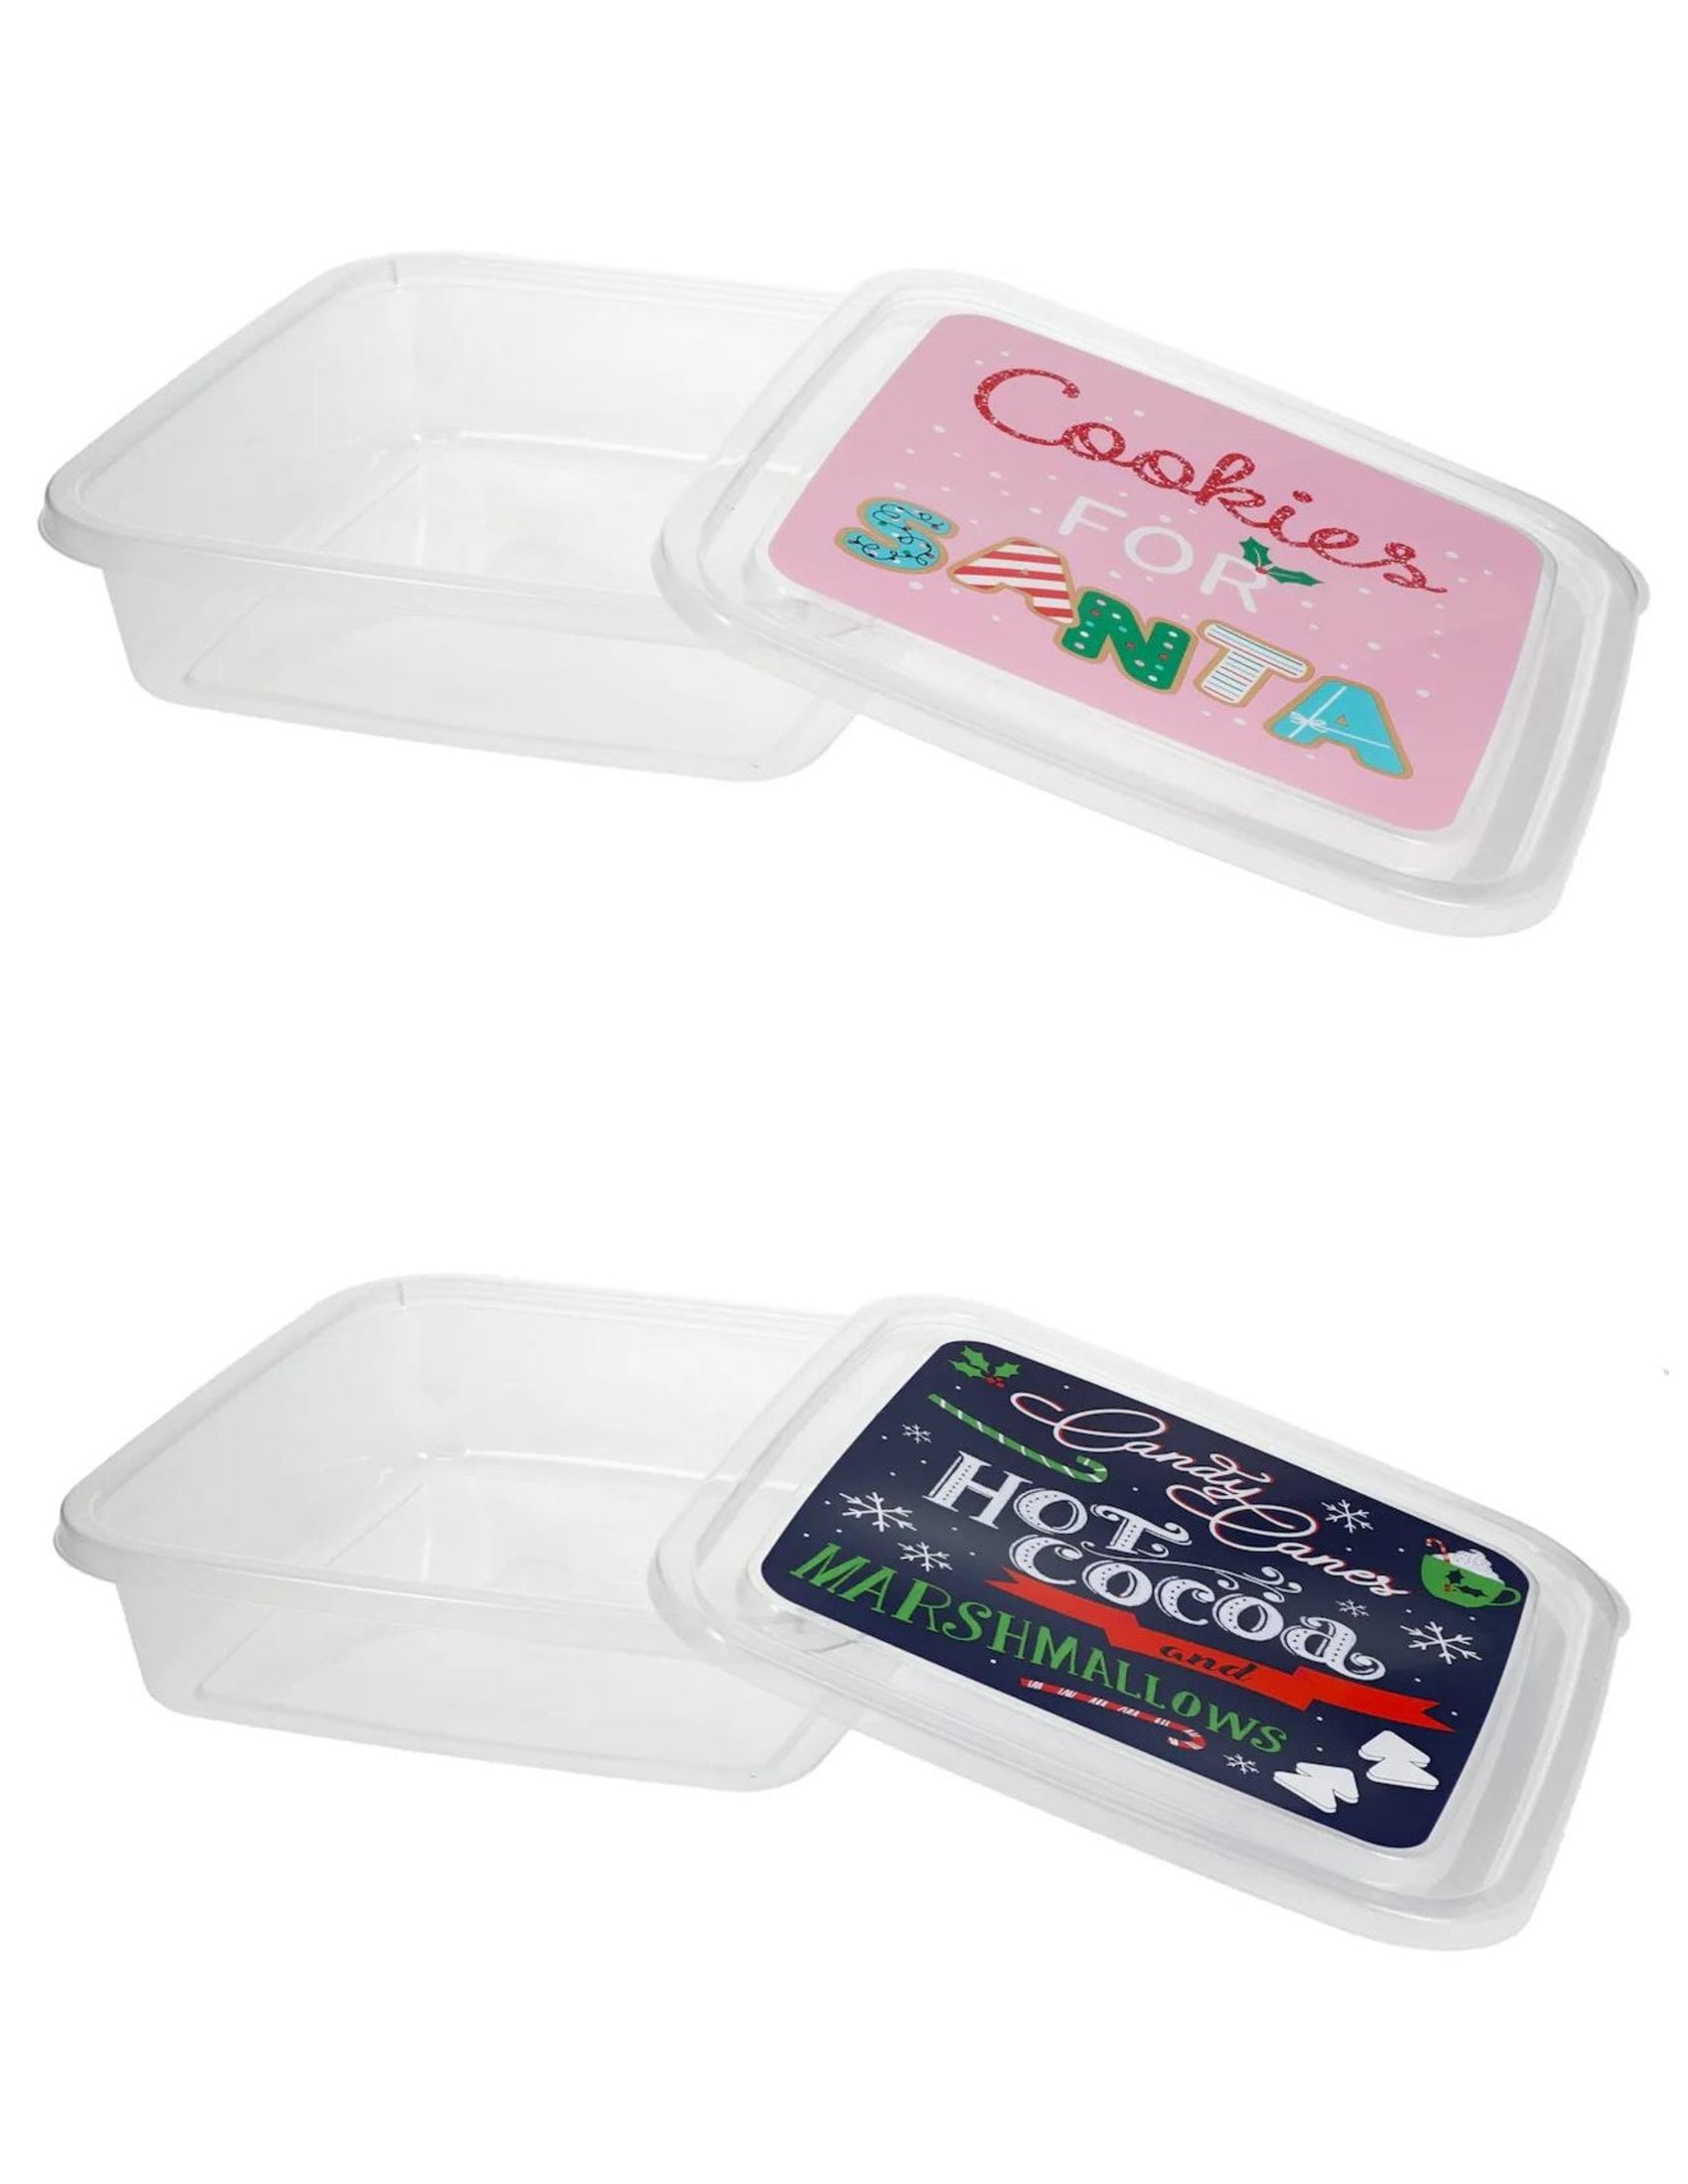 NEW Christmas Holiday 24 Pc Core Kitchen Food Storage Containers